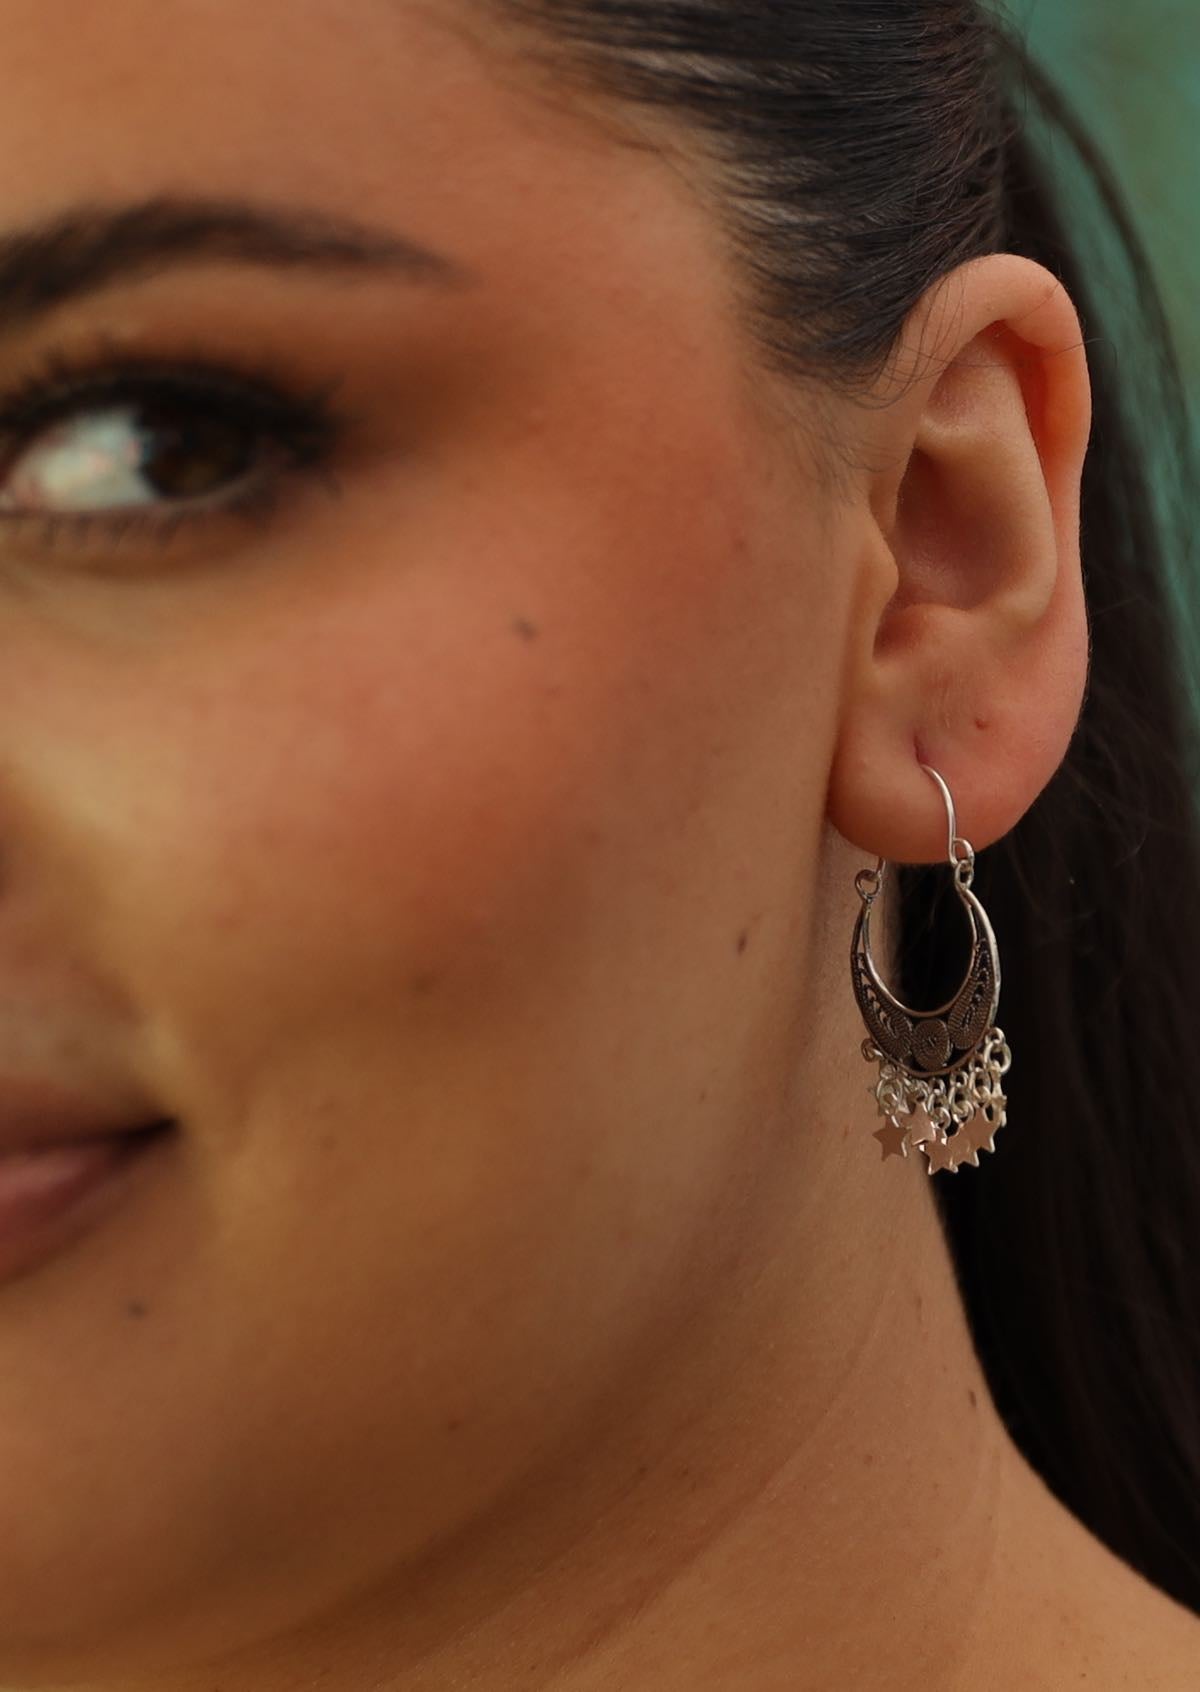 silver boho earrings with dangly stars and filigree work on woman's ear